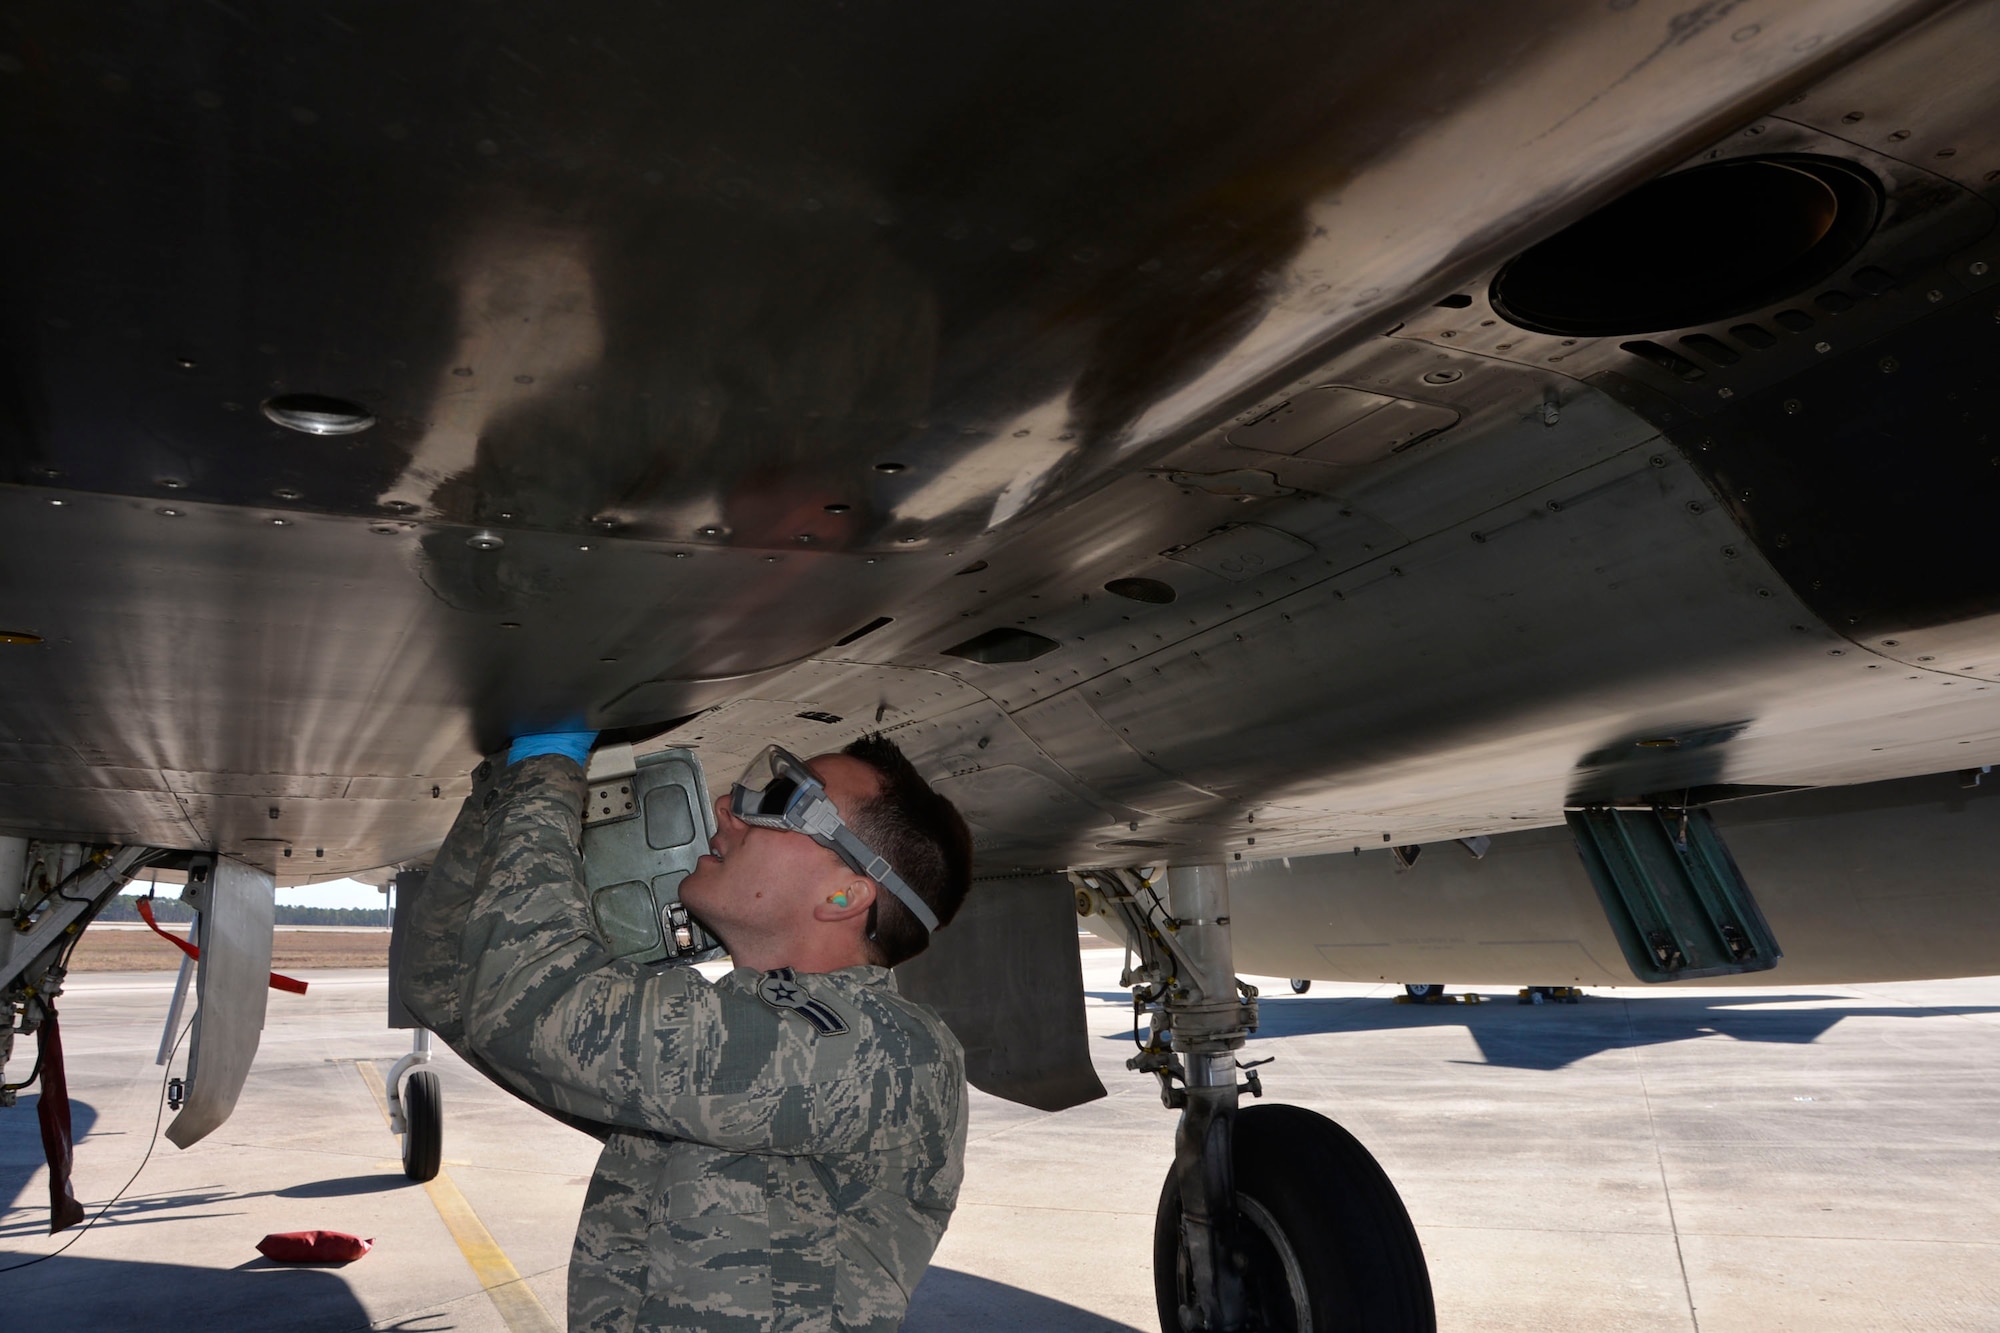 From the 142nd Fighter Wing, Portland, Oregon, Airman 1st Class Brian Perkins, 142nd Maintenance Group F-15 crew chief, takes an oil sample following a Combat Archer sortie at Tyndall AFB, Florida, Jan. 29. Combat Archer is a two-week weapon systems evaluation program where participants load, fly and shoot live missiles and subsequently evaluate the entire process to validate whether the weapon performs according to established specifications. (Air Force Photo Released/Mary McHale)